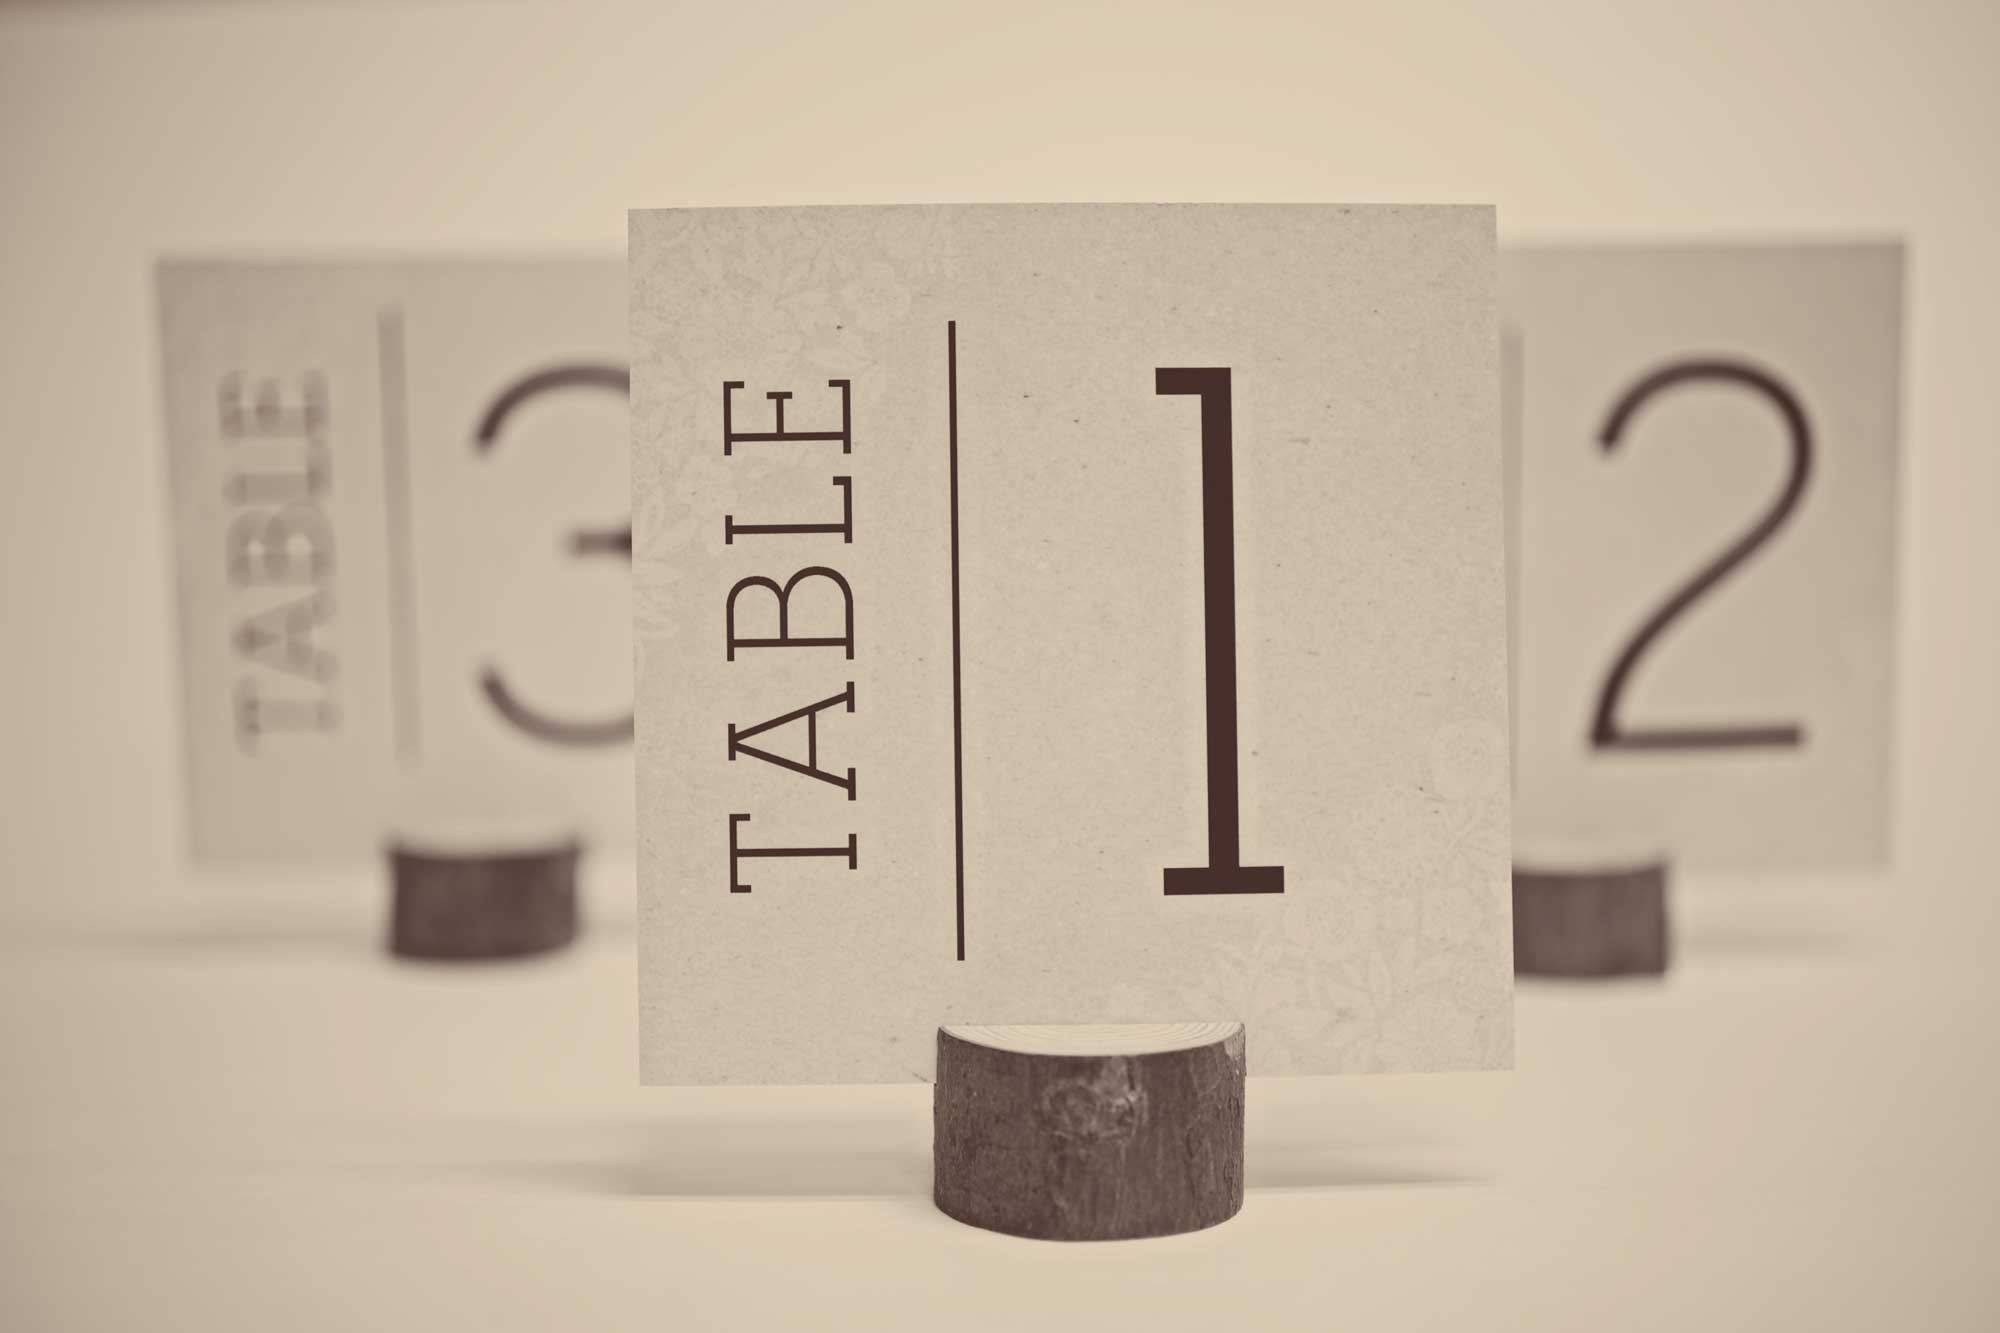 Free Wedding Table Number Cards - Free Printable Table Numbers 1 30